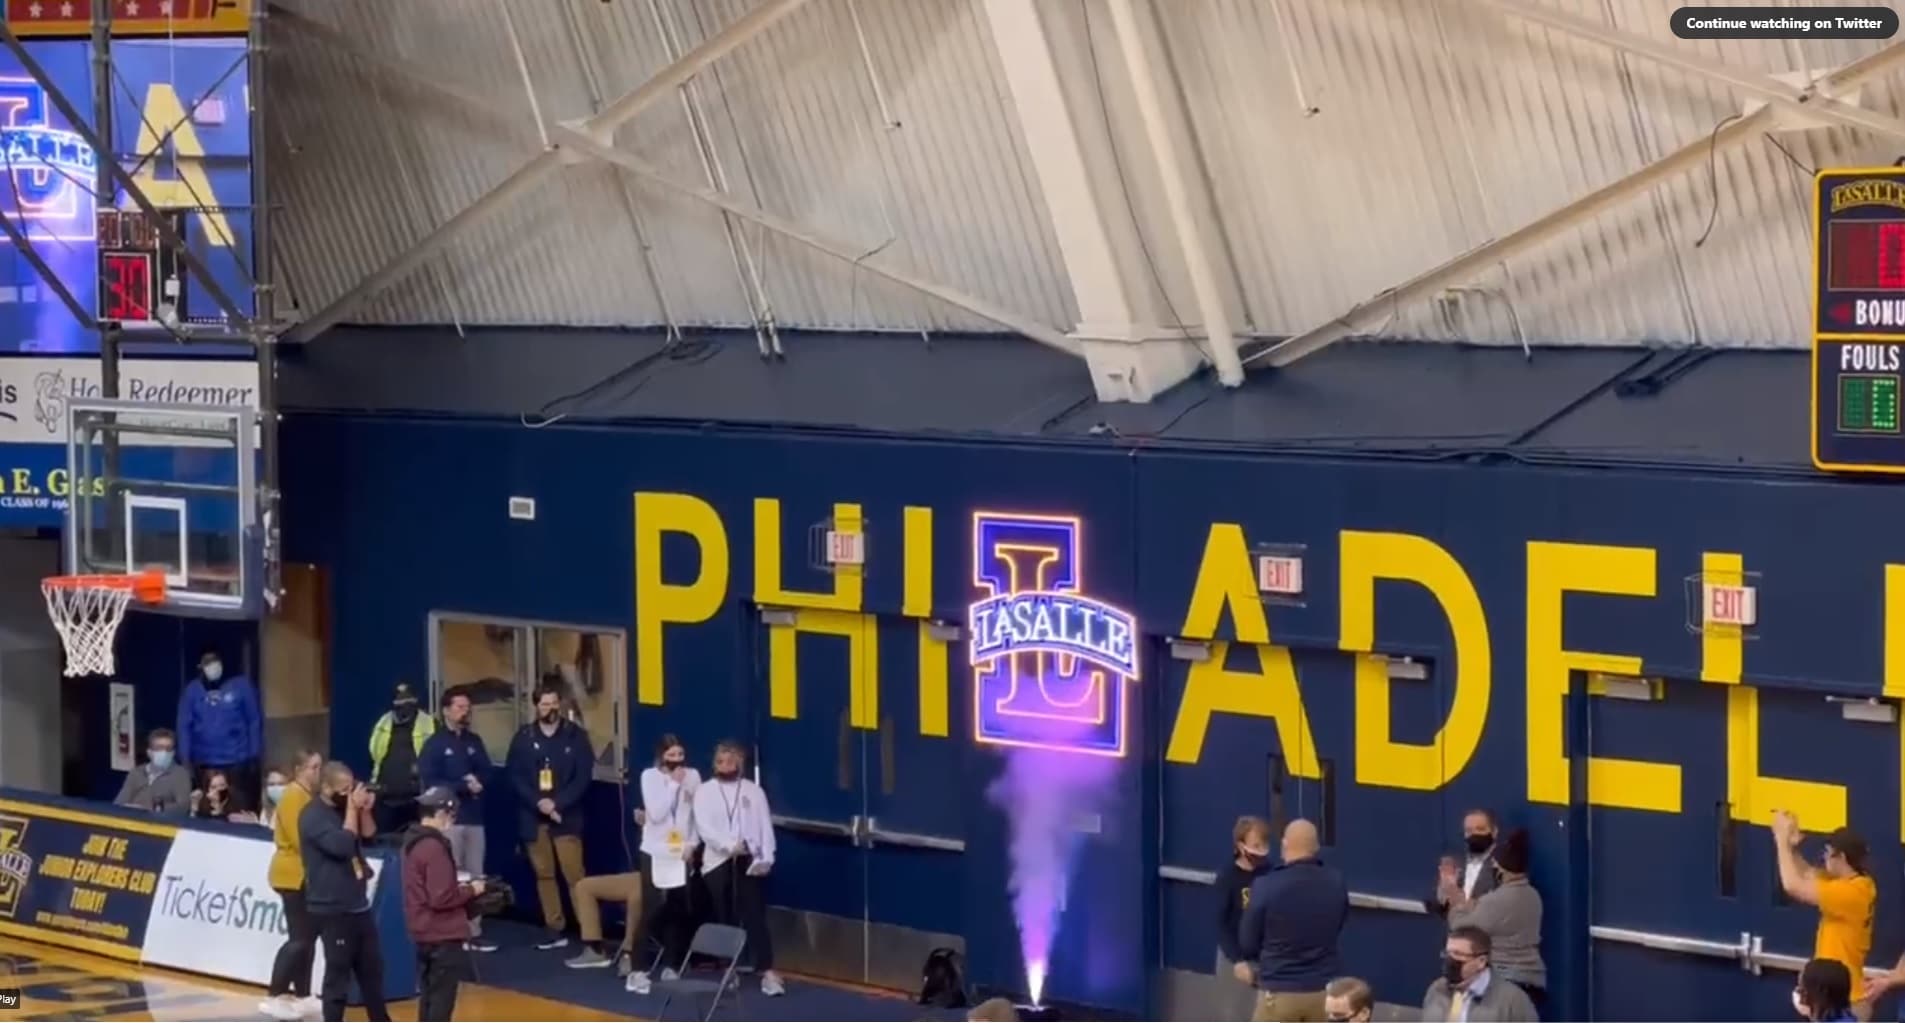 Get Pumped for Basketball with La Salle’s Smoke Machine